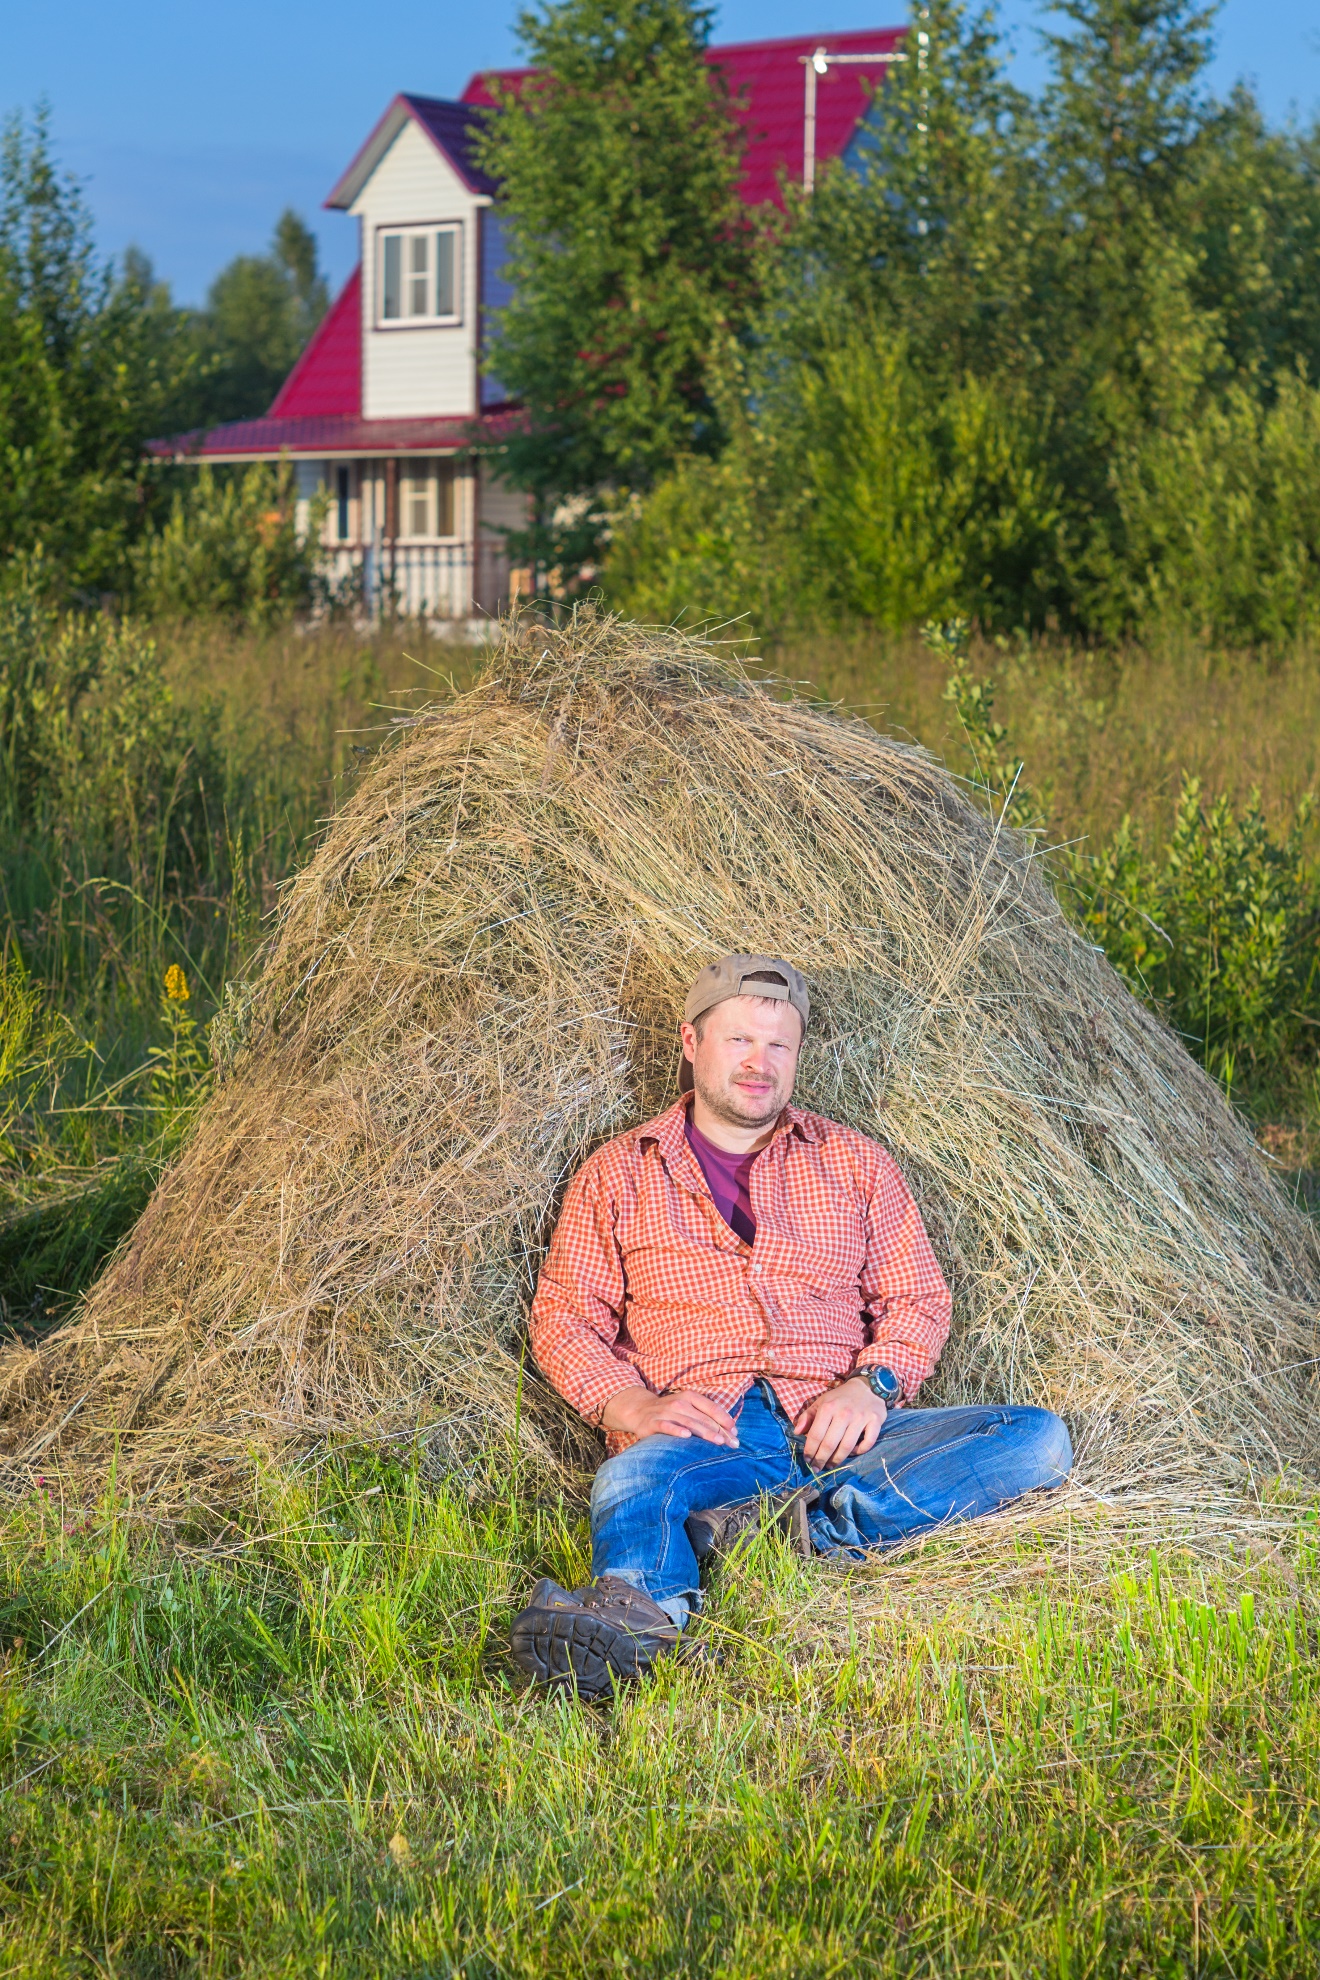 A person sitting on a pile of hay

Description automatically generated with medium confidence